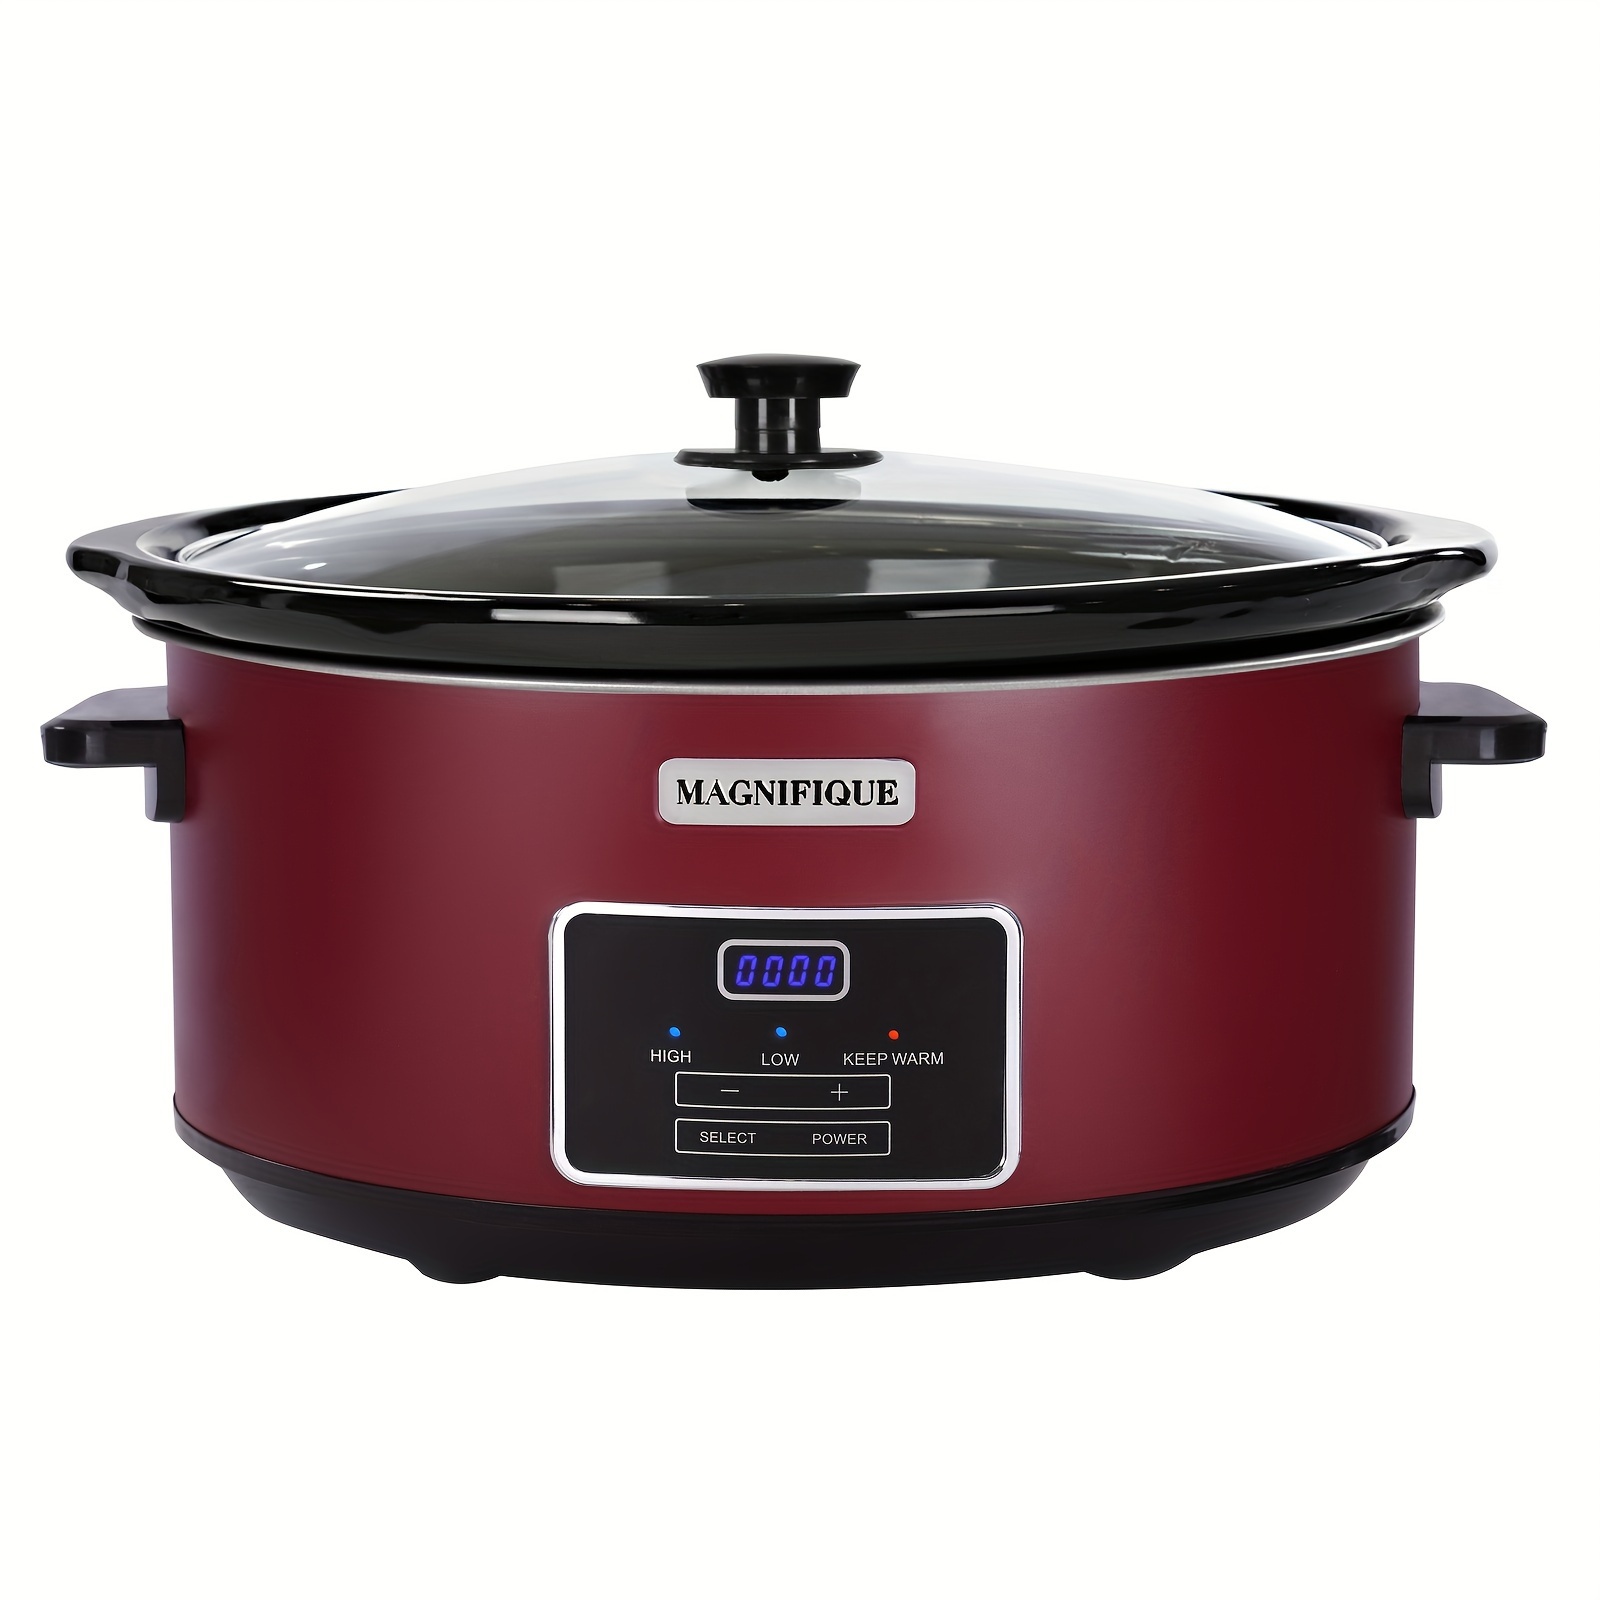 

1pc, Magnifique 8 Quart Slow Cooker Oval Manual Pot Food Warmer With 3 Cooking Settings, Red Stainless Steel pot, Kitchen Supplies